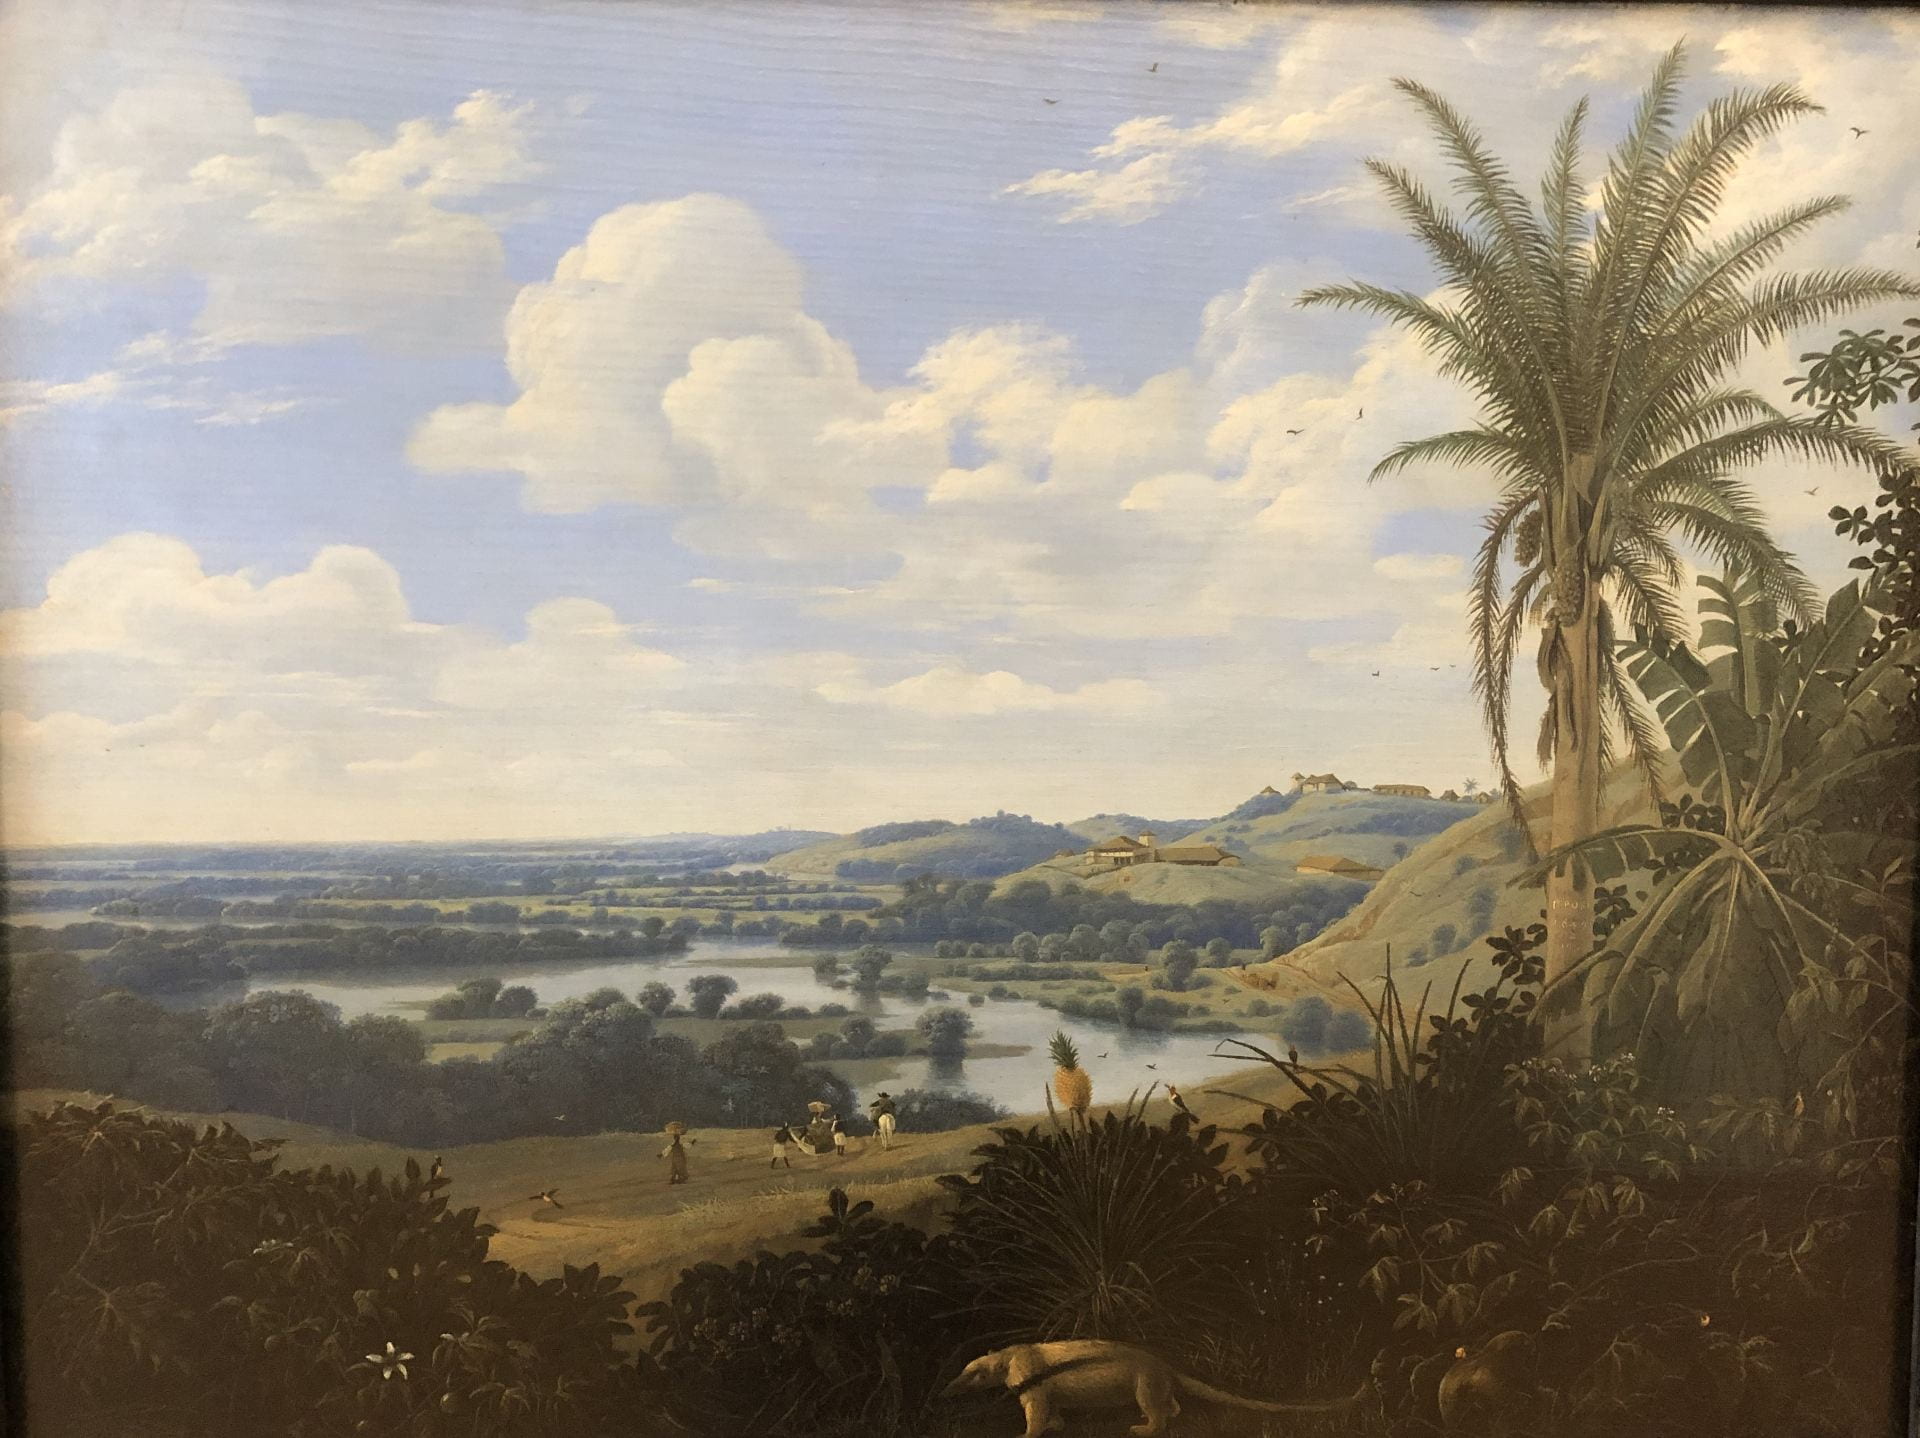 A landscape with large palm tree at right. An anteater walks through the foreground. The middle- and back-grounds are dominated by bands of golden pasture and darker forest, all below a large blue sky. 